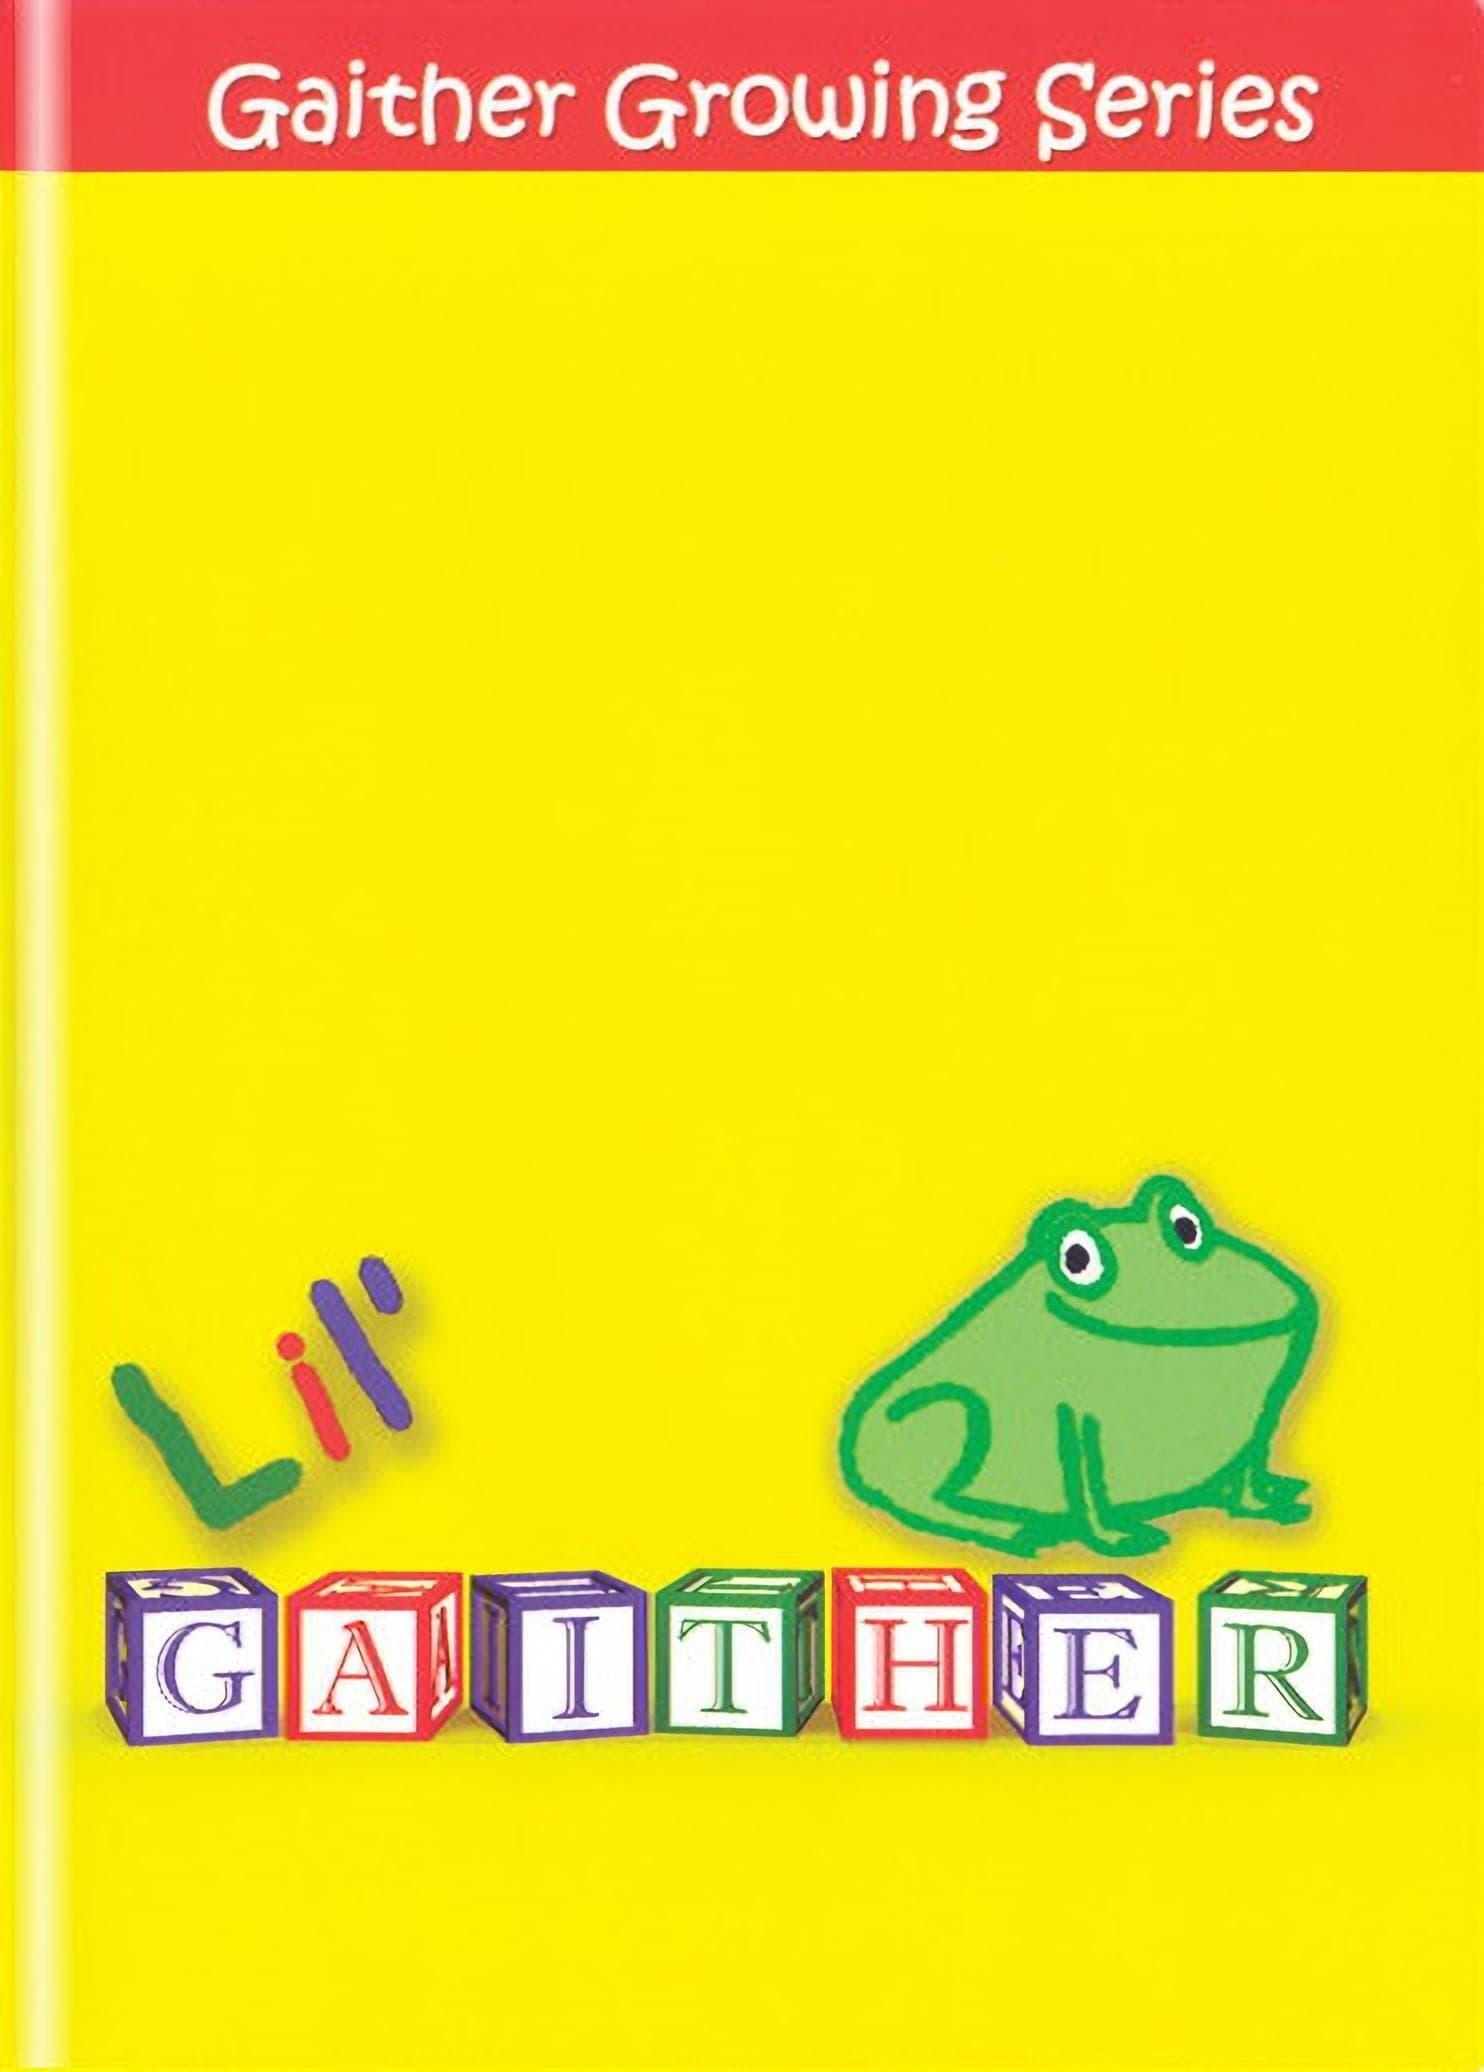 Lil' Gaither poster